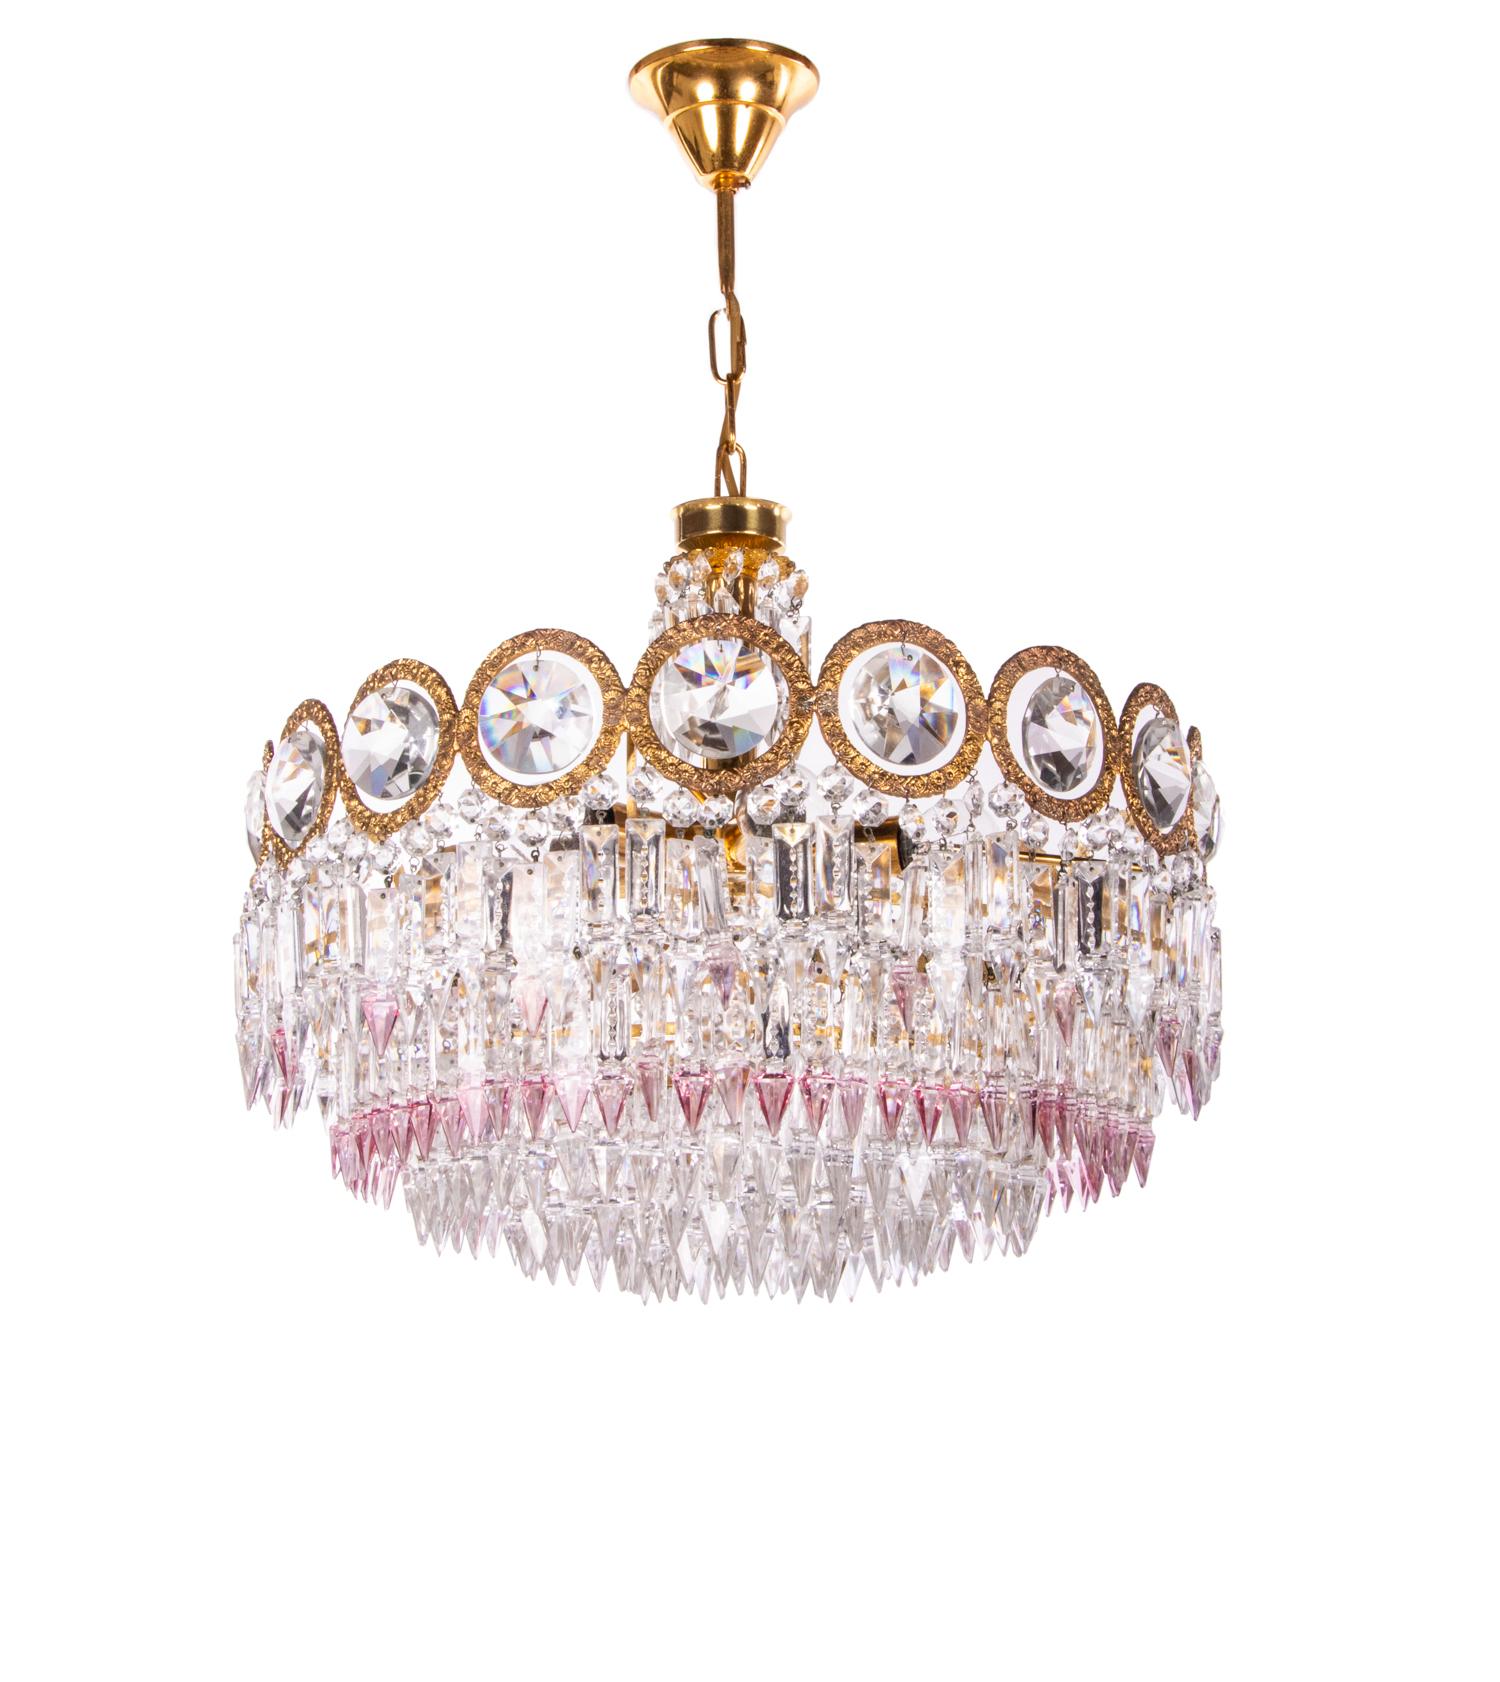 Elegant chandelier with a brass frame and Swarovski crystals in clear and some with lavender lace amongst them. These lamps have an incomparable unique character. A touch of luxury fills the room. Manufactured by Palwa, Germany in the 1960s. 
